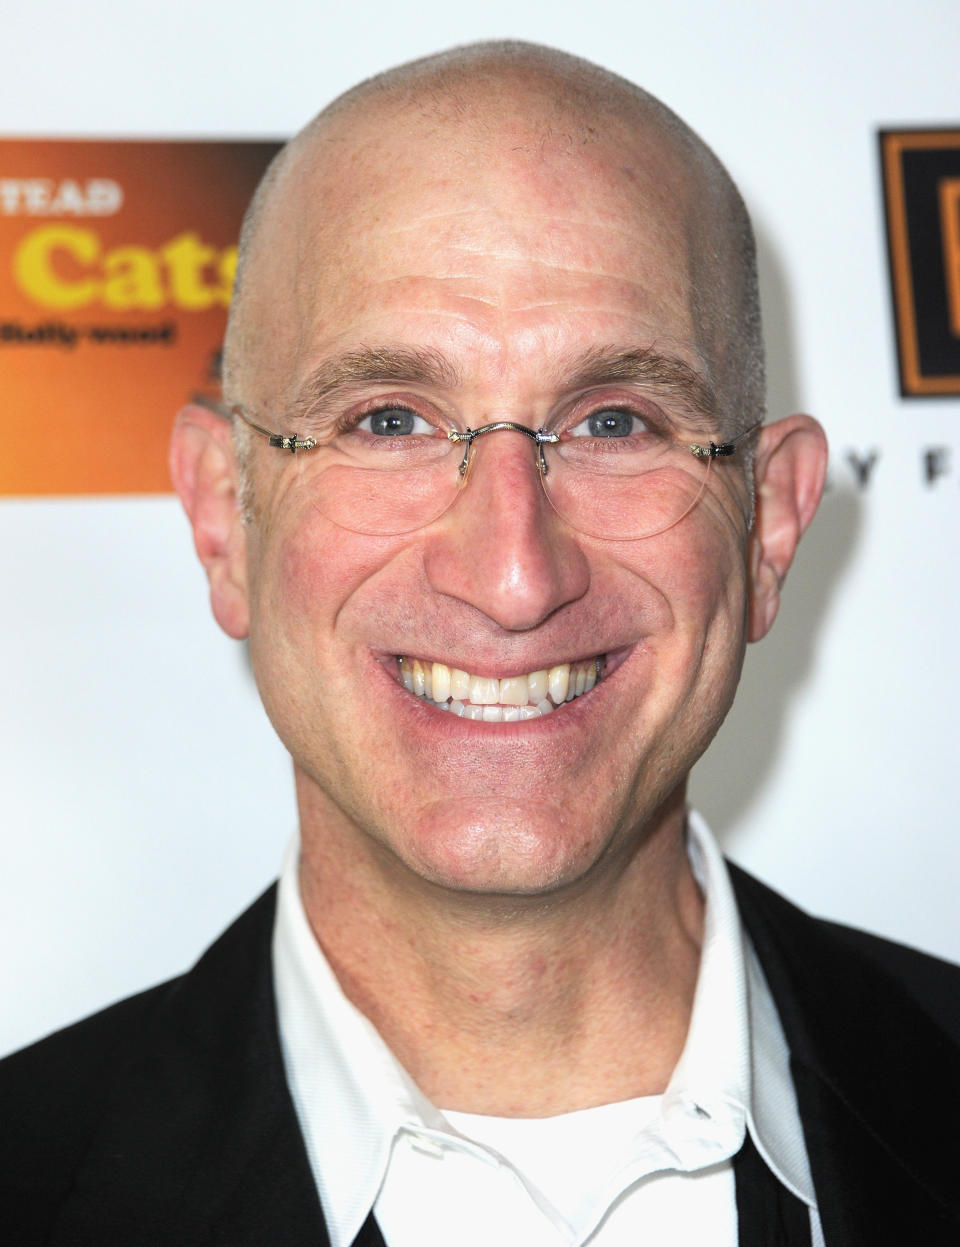 Jeff Greenstein is credited as a director and producer of the Amazon comedy special, 